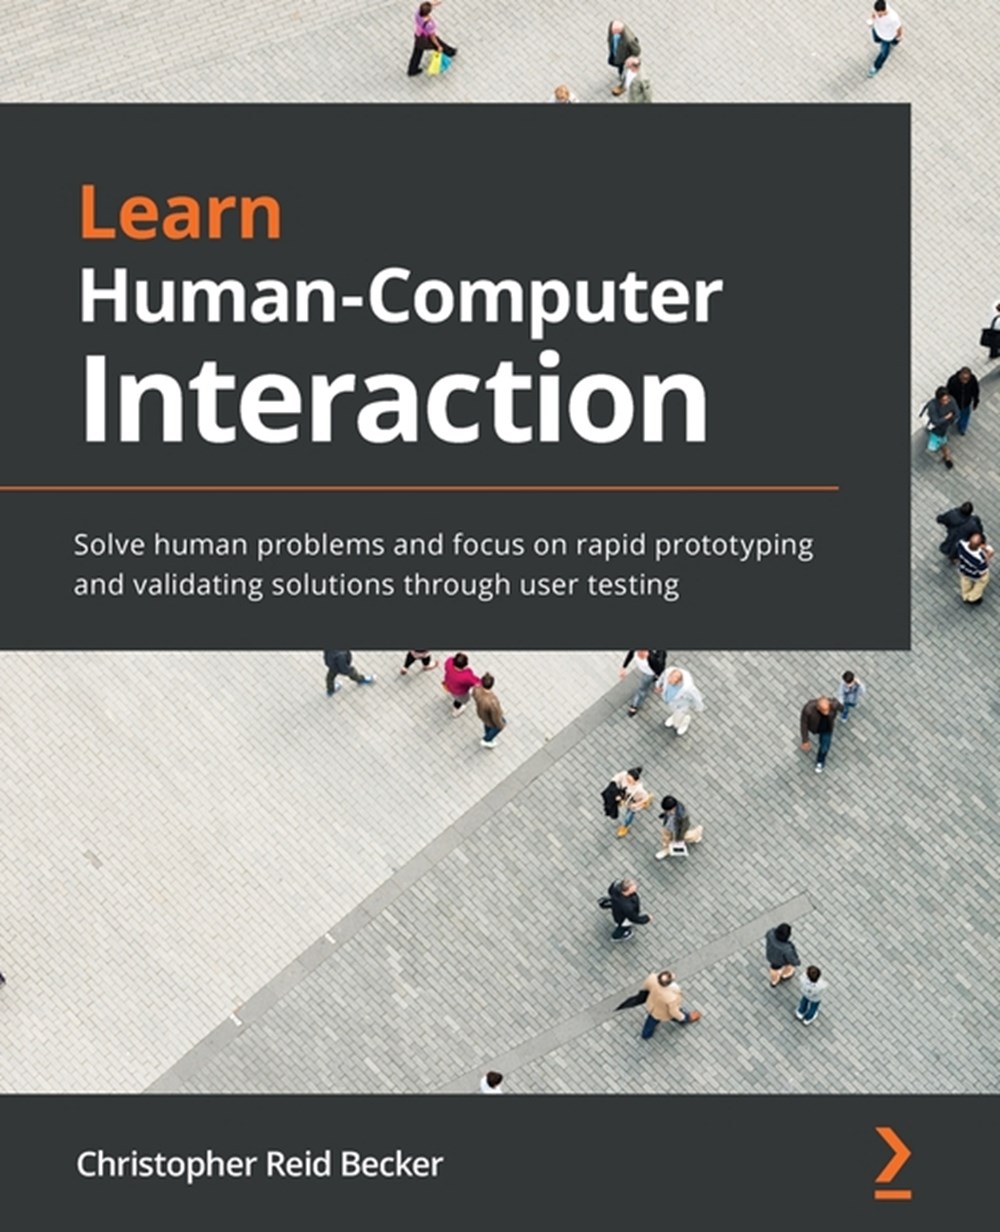 literature review on human computer interaction